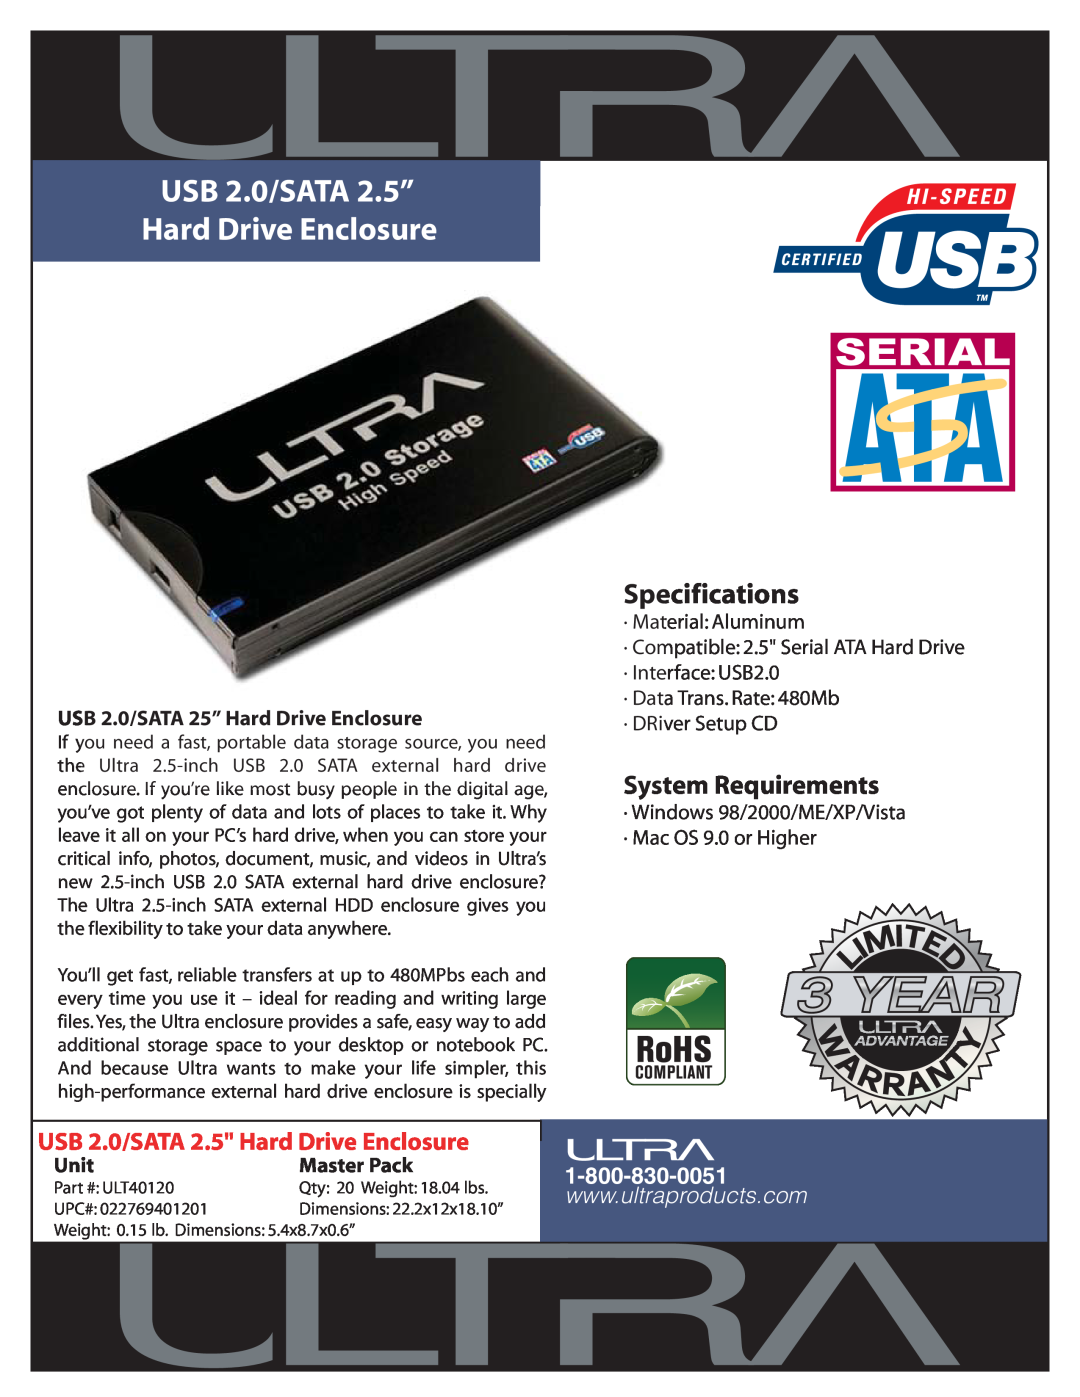 Ultra Products ULT40120 specifications USB 2.0/SATA 2.5” Hard Drive Enclosure, Specifications, System Requirements, Unit 